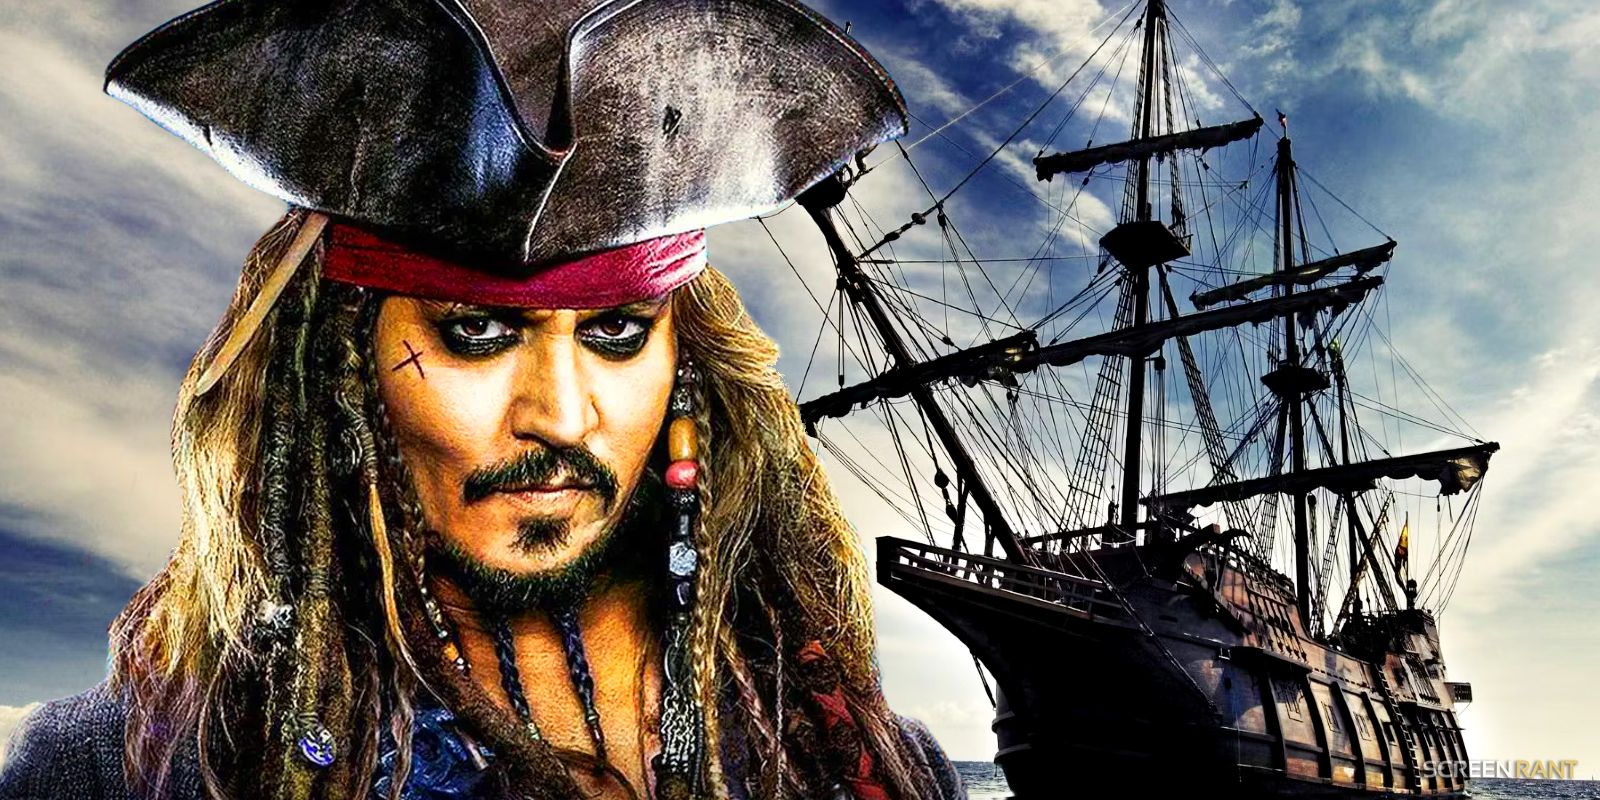 Johnny Depp as Jack Sparrow in the Pirates of the Caribbean movies next to the Black Pearl ship